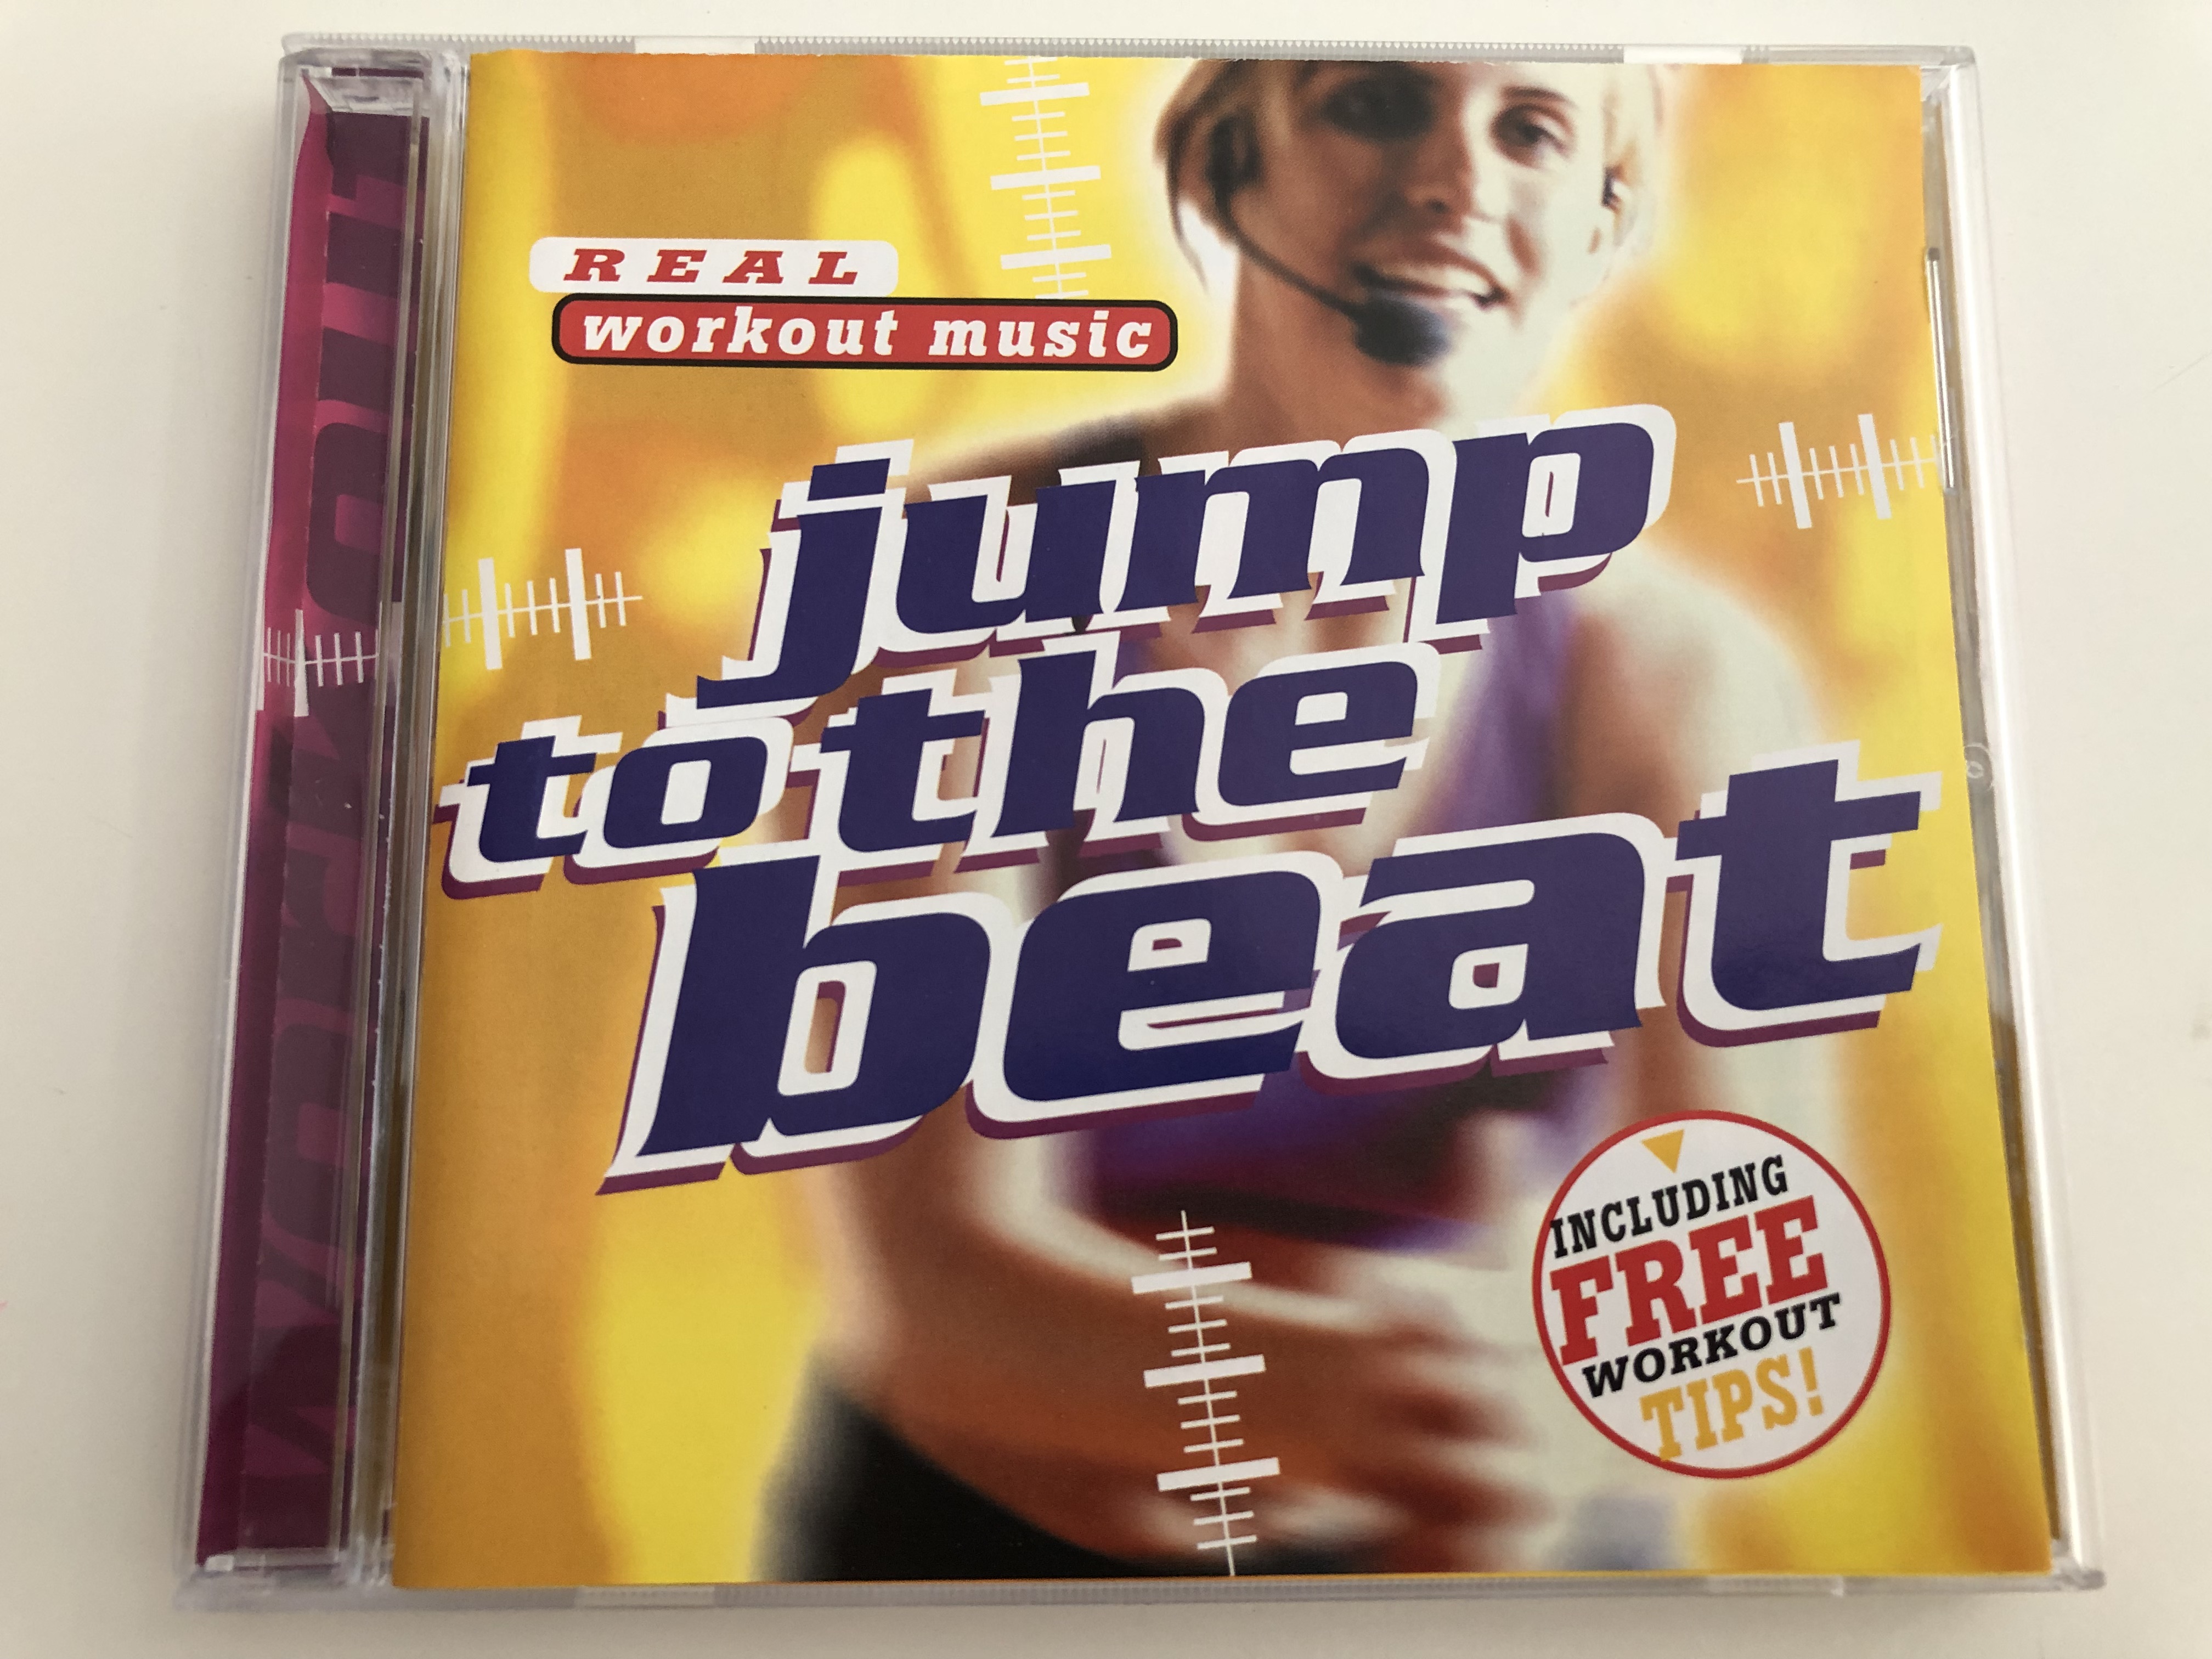 jump-to-the-beat-real-workout-music-including-free-workout-tips-audio-cd-2000-disky-dc-250572-1-.jpg